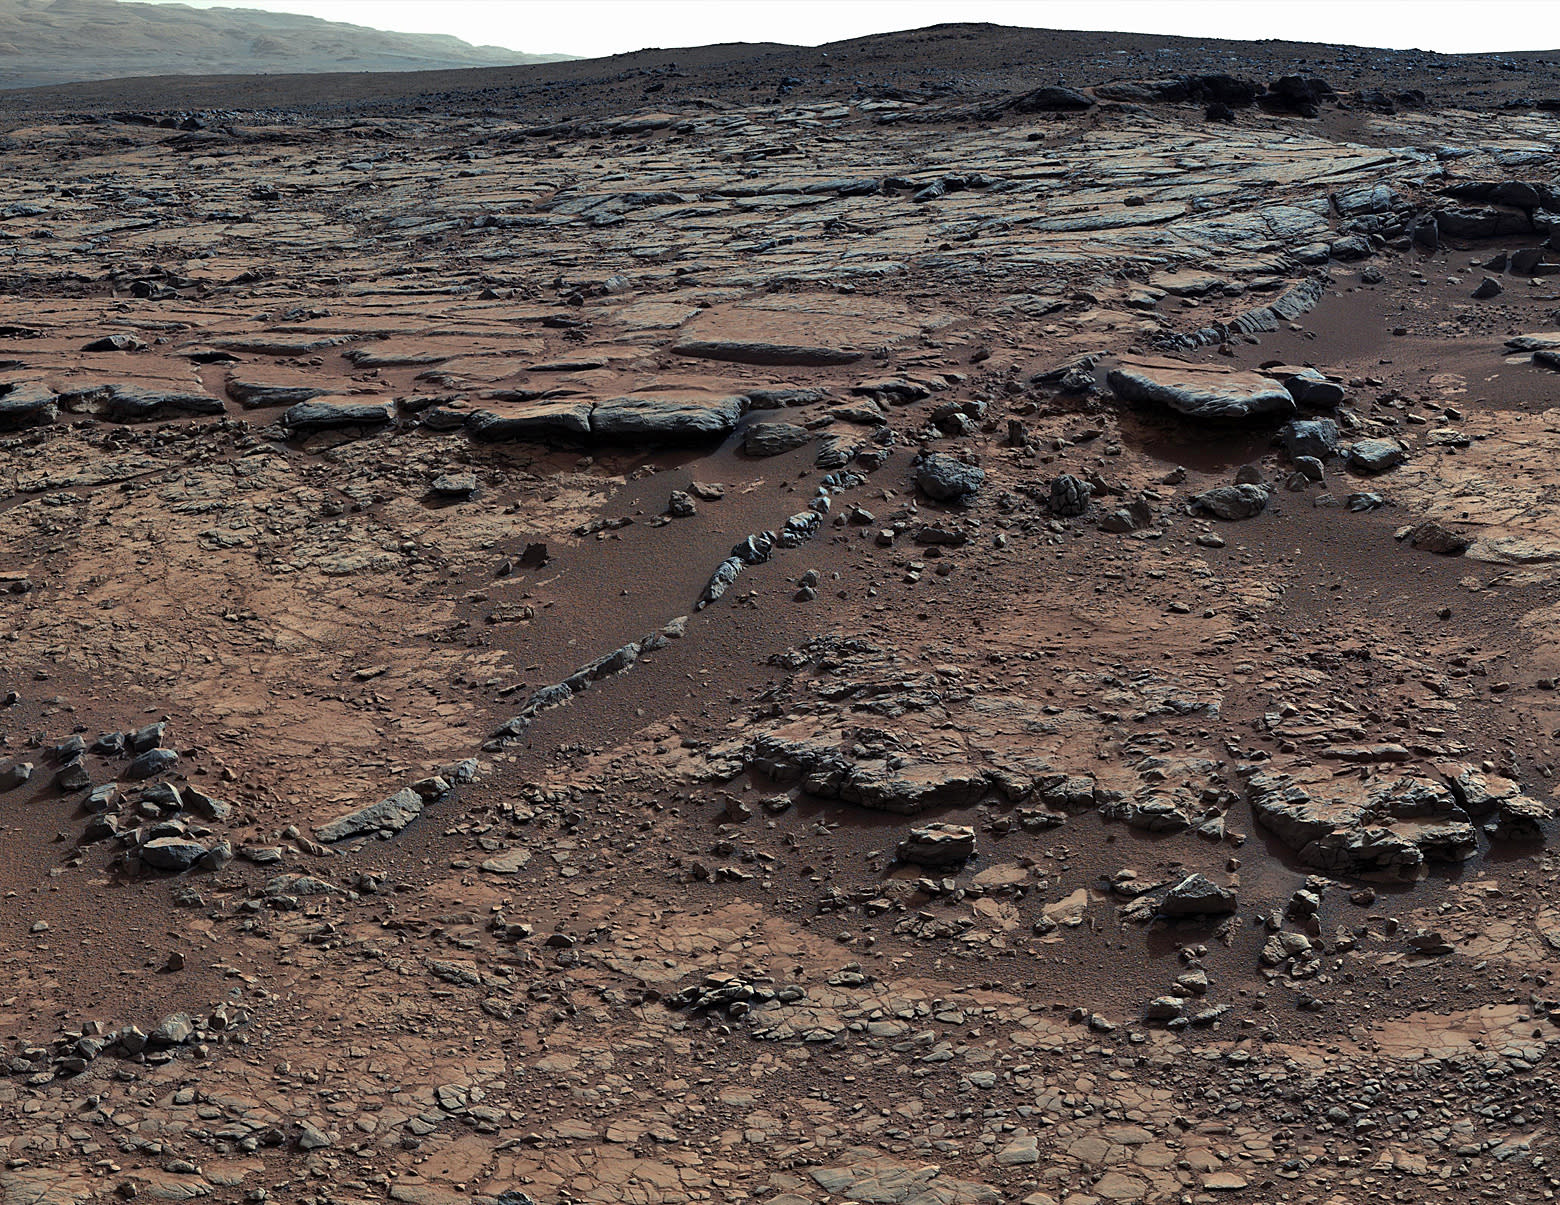 New Mars rover discovery hints at life, but we’re not there yet